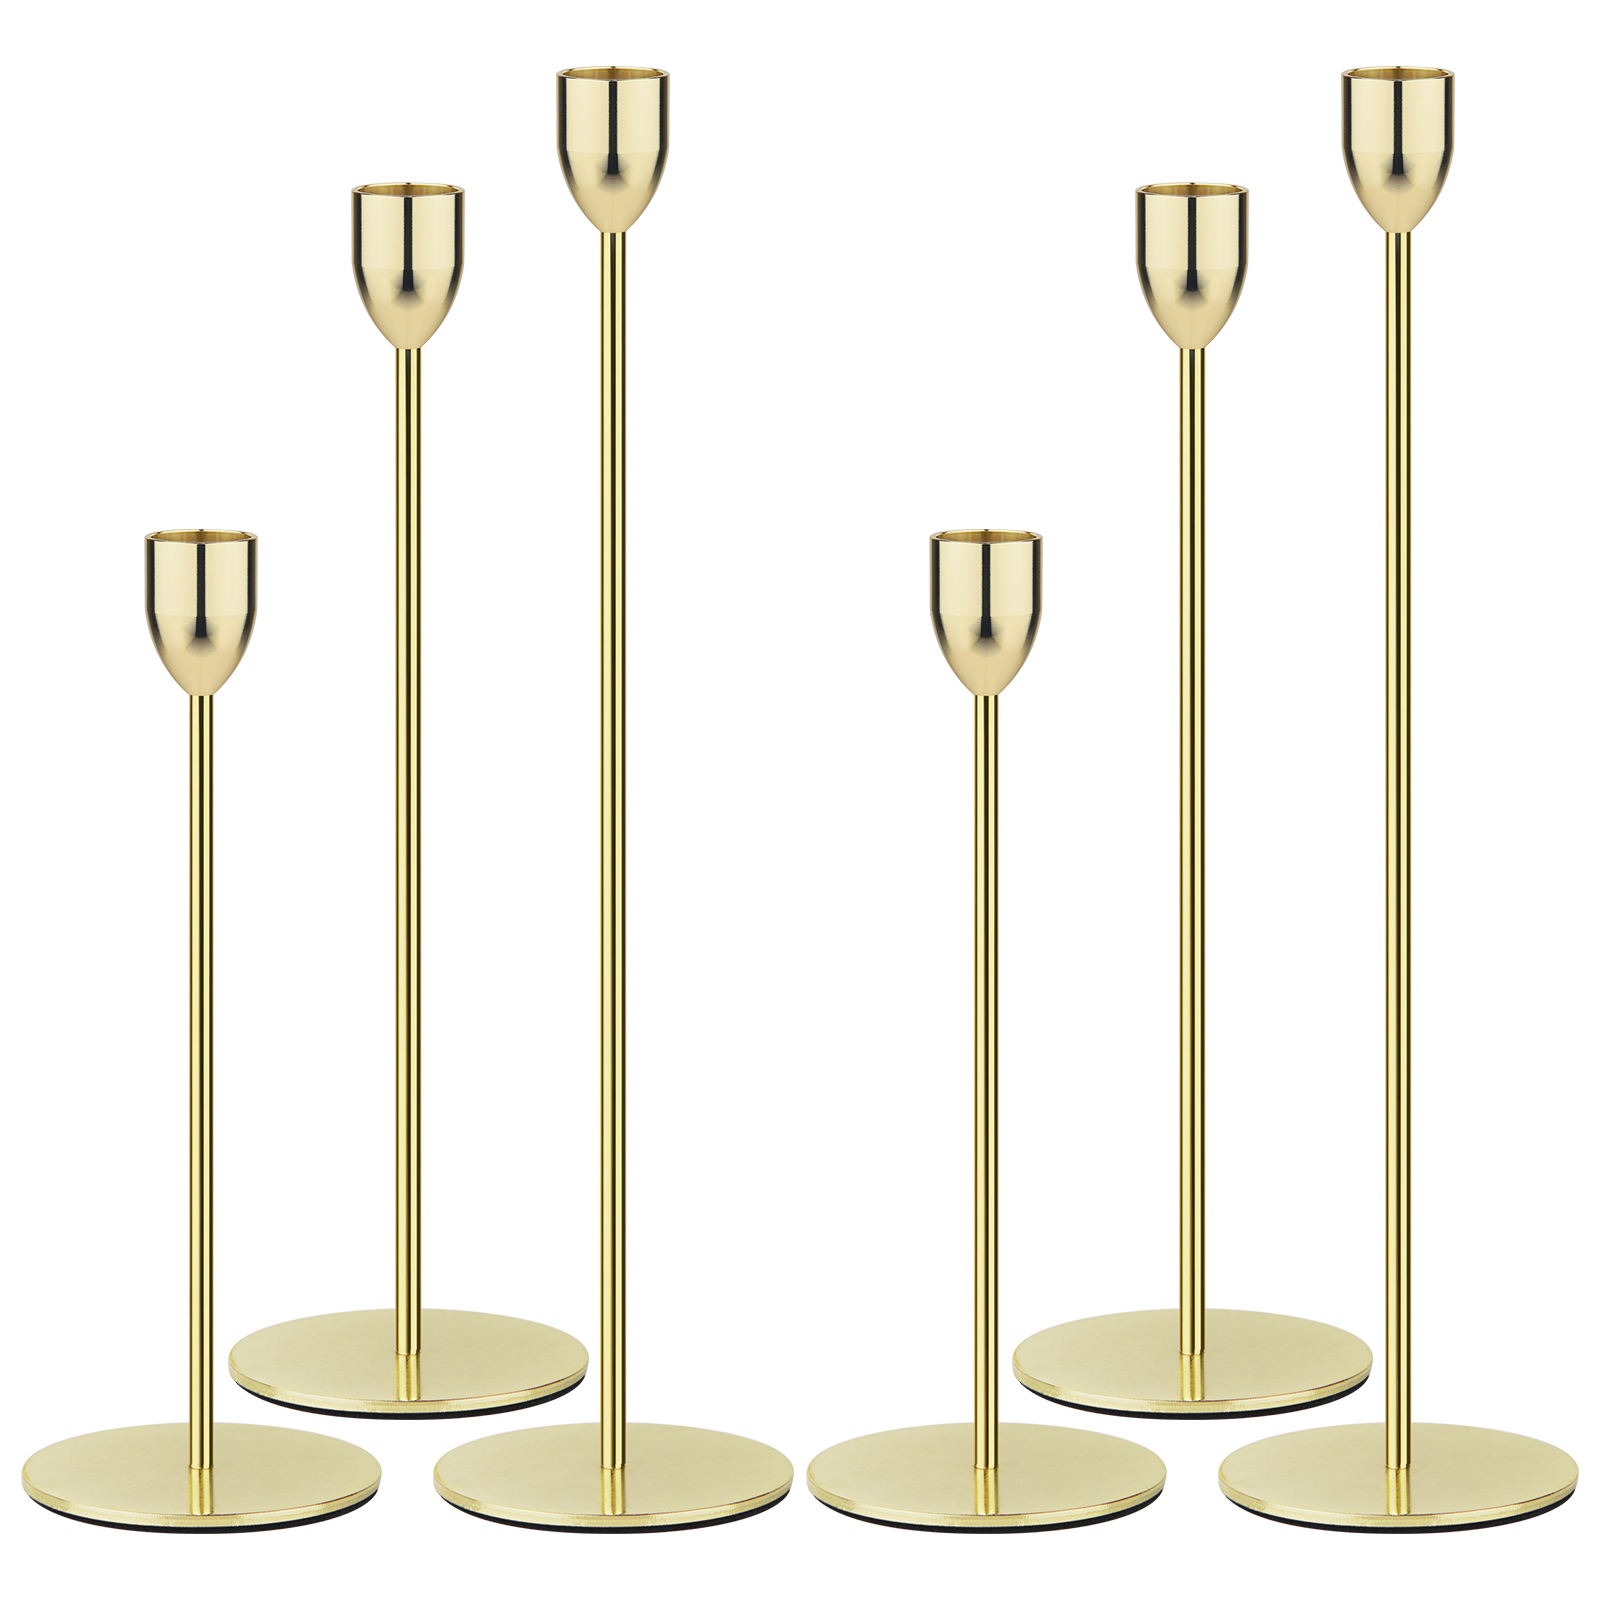 Ohtomber Gold Taper Candle Holders - 6PCS Candlestick Holders, Candle Sticks Holder Decor for Pillar